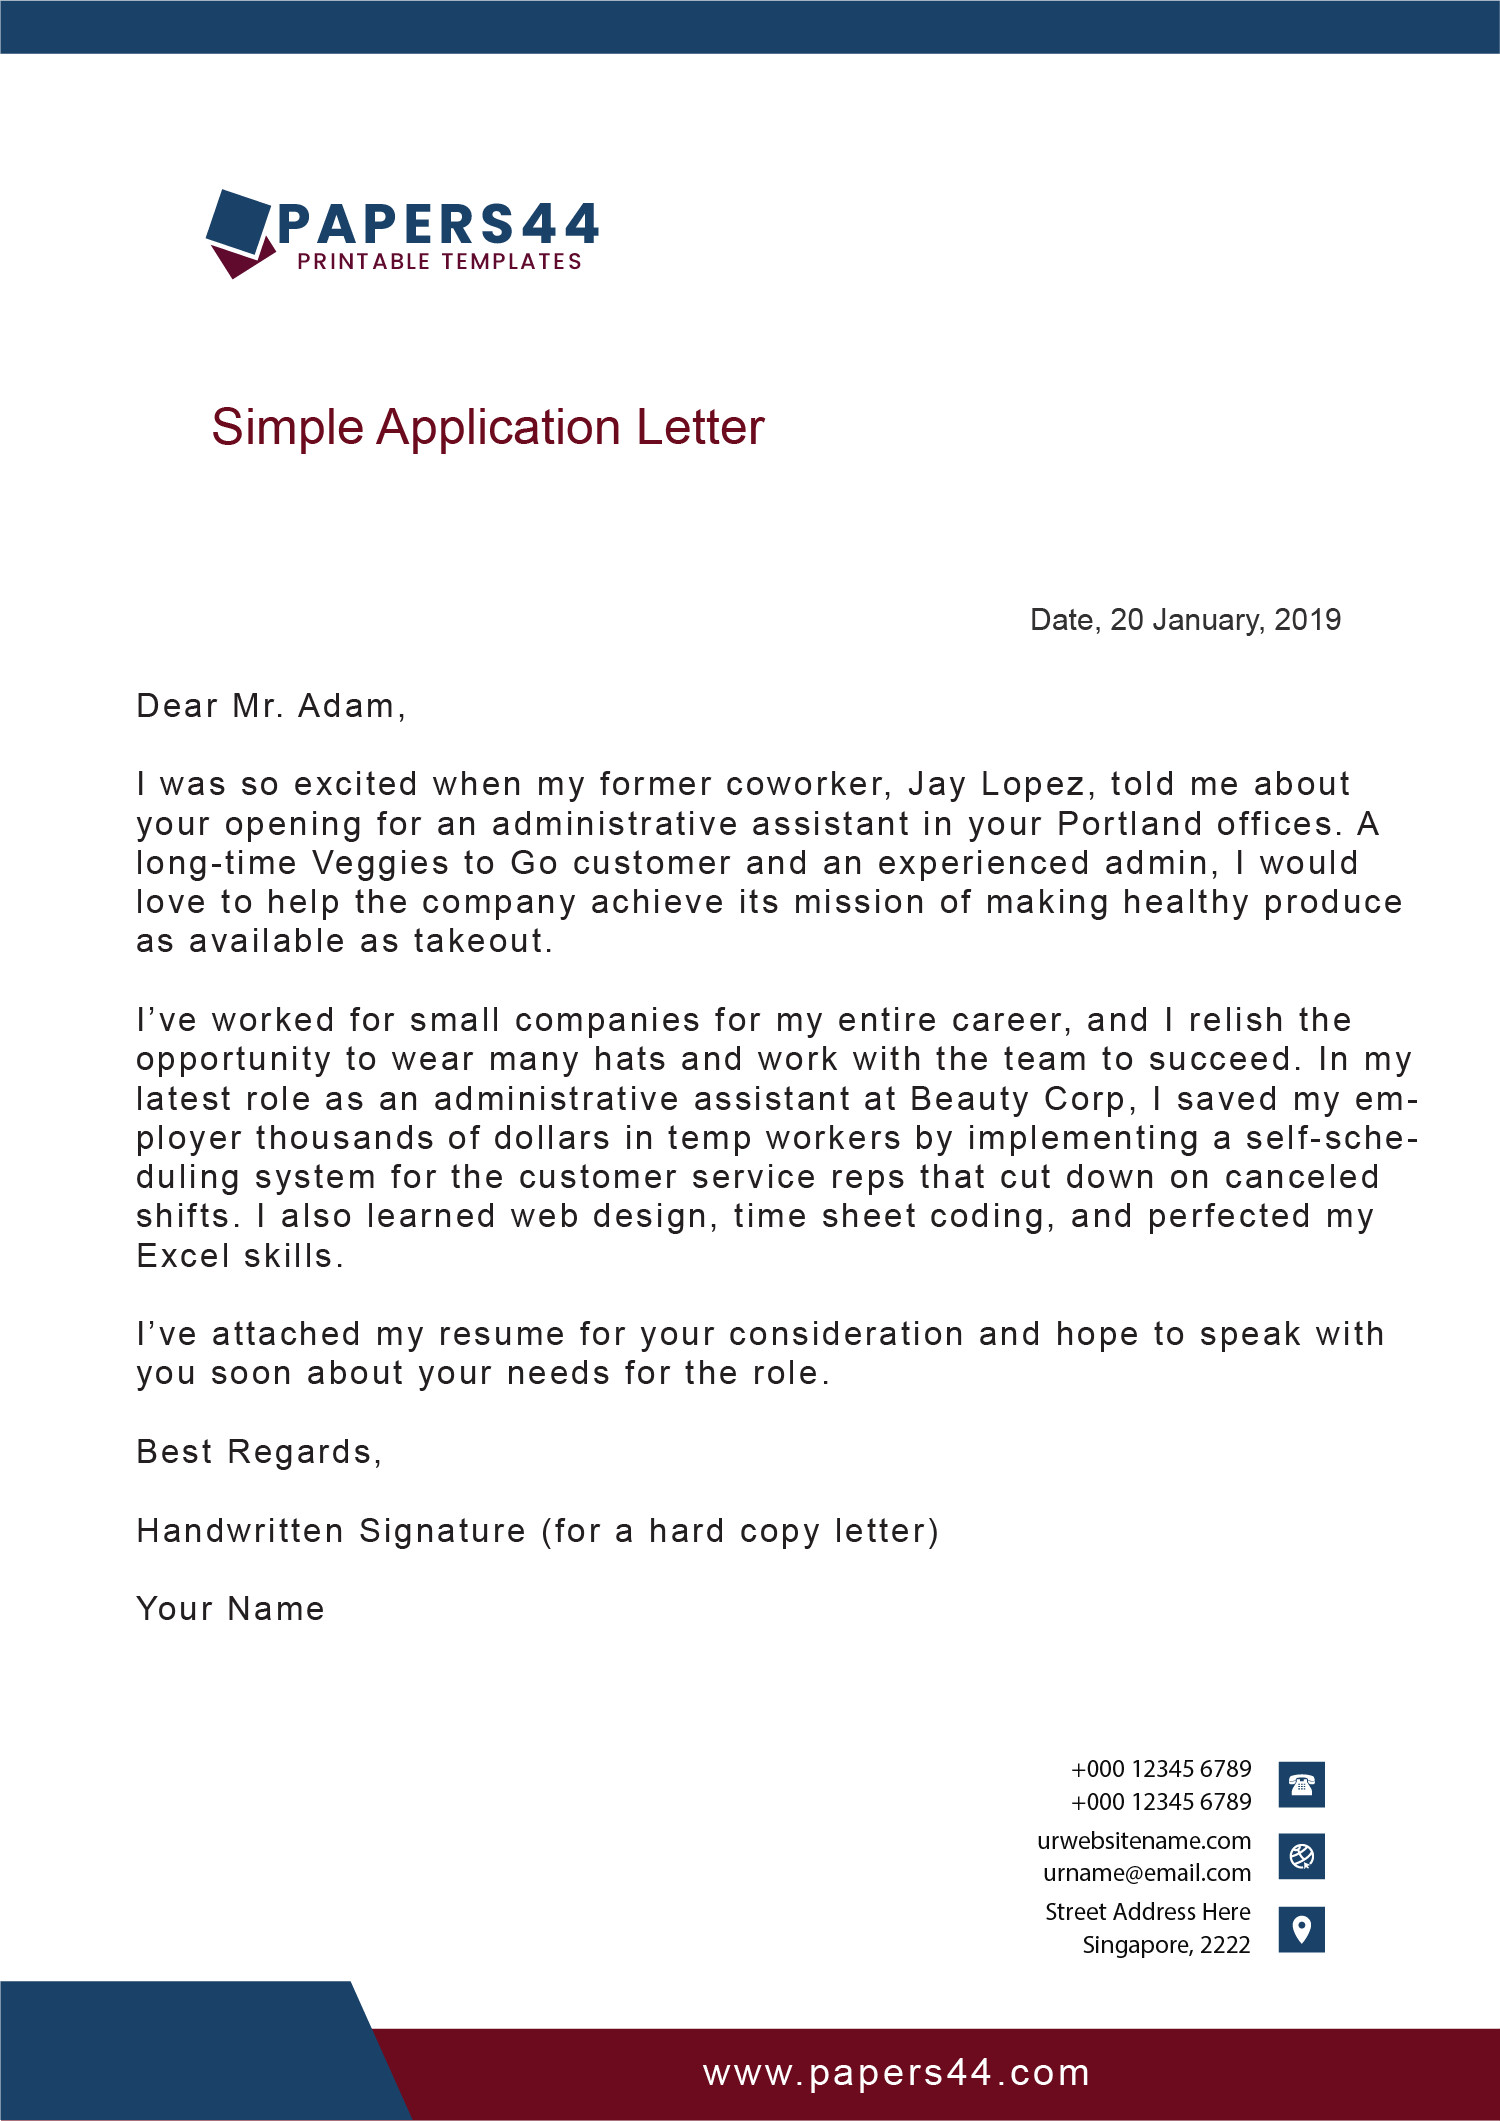 Letter Of Application Template Application Letters Professional Pdf Templates